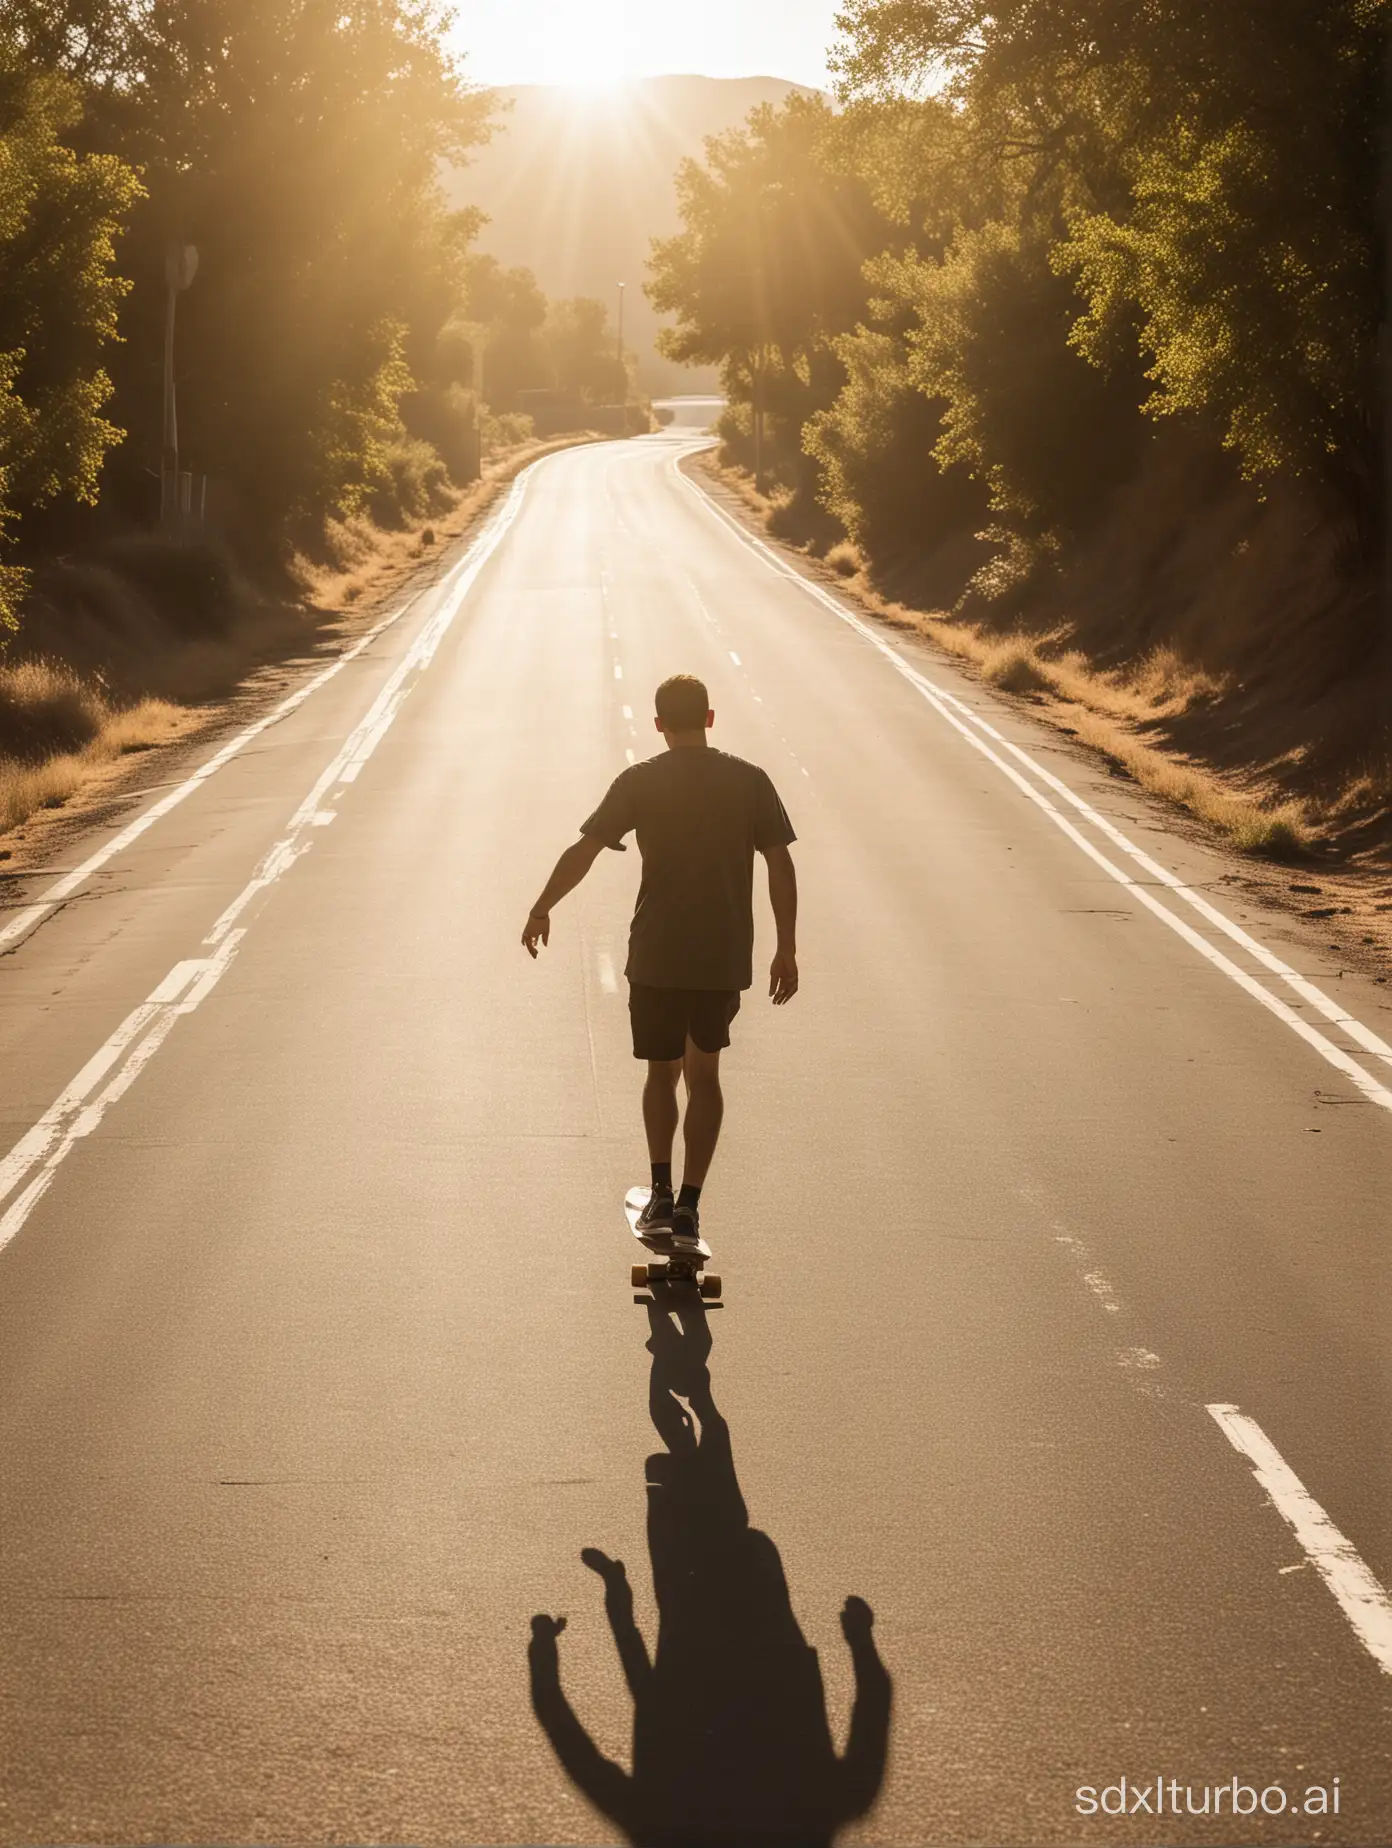 Under the intense glare of the sun, a man skillfully glides on his skateboard, traversing a winding road....